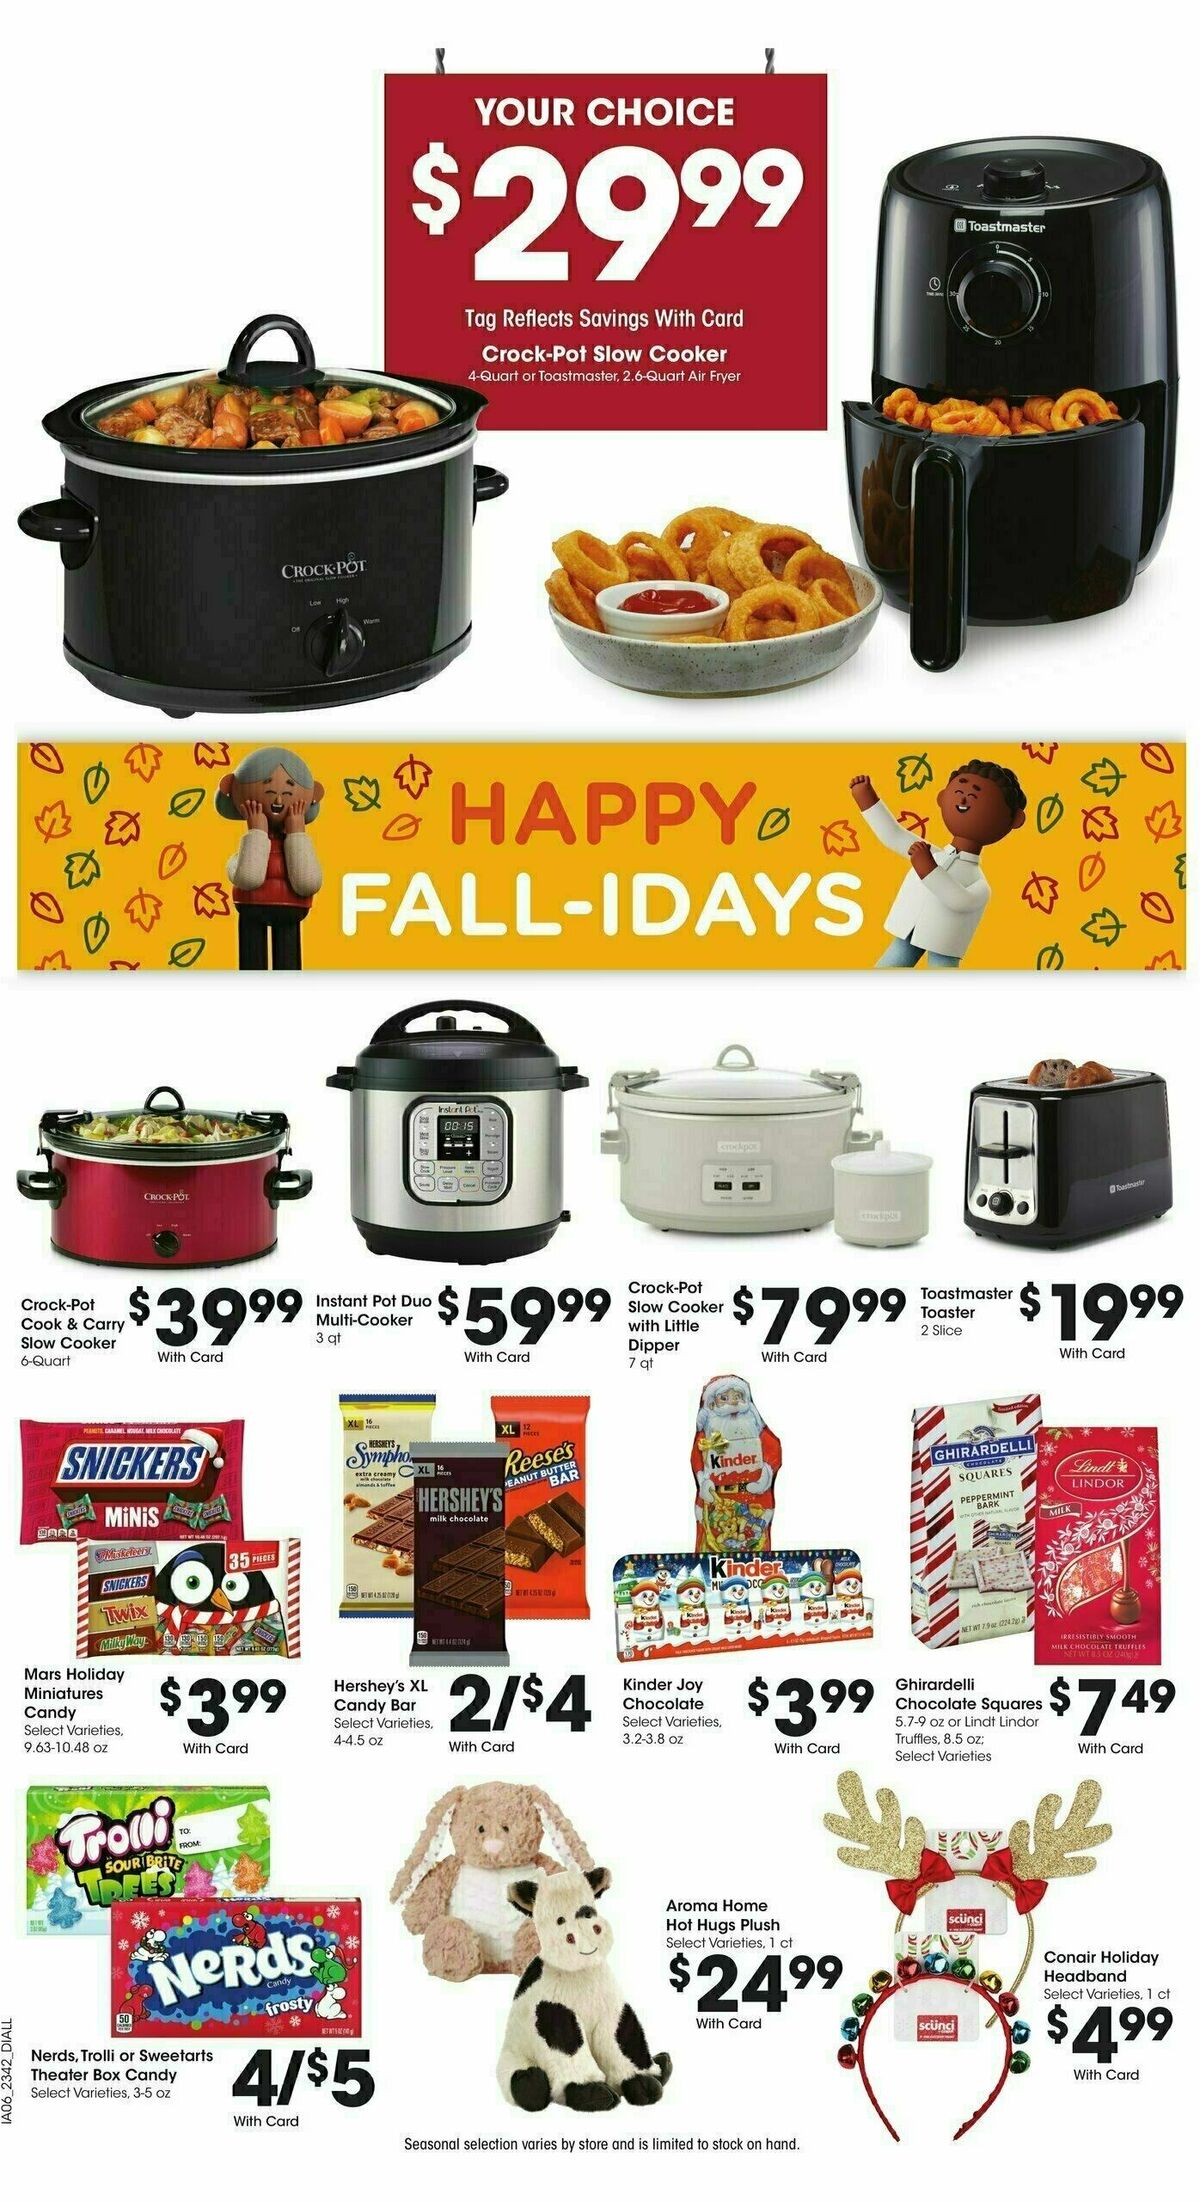 Baker's Weekly Ad from November 15